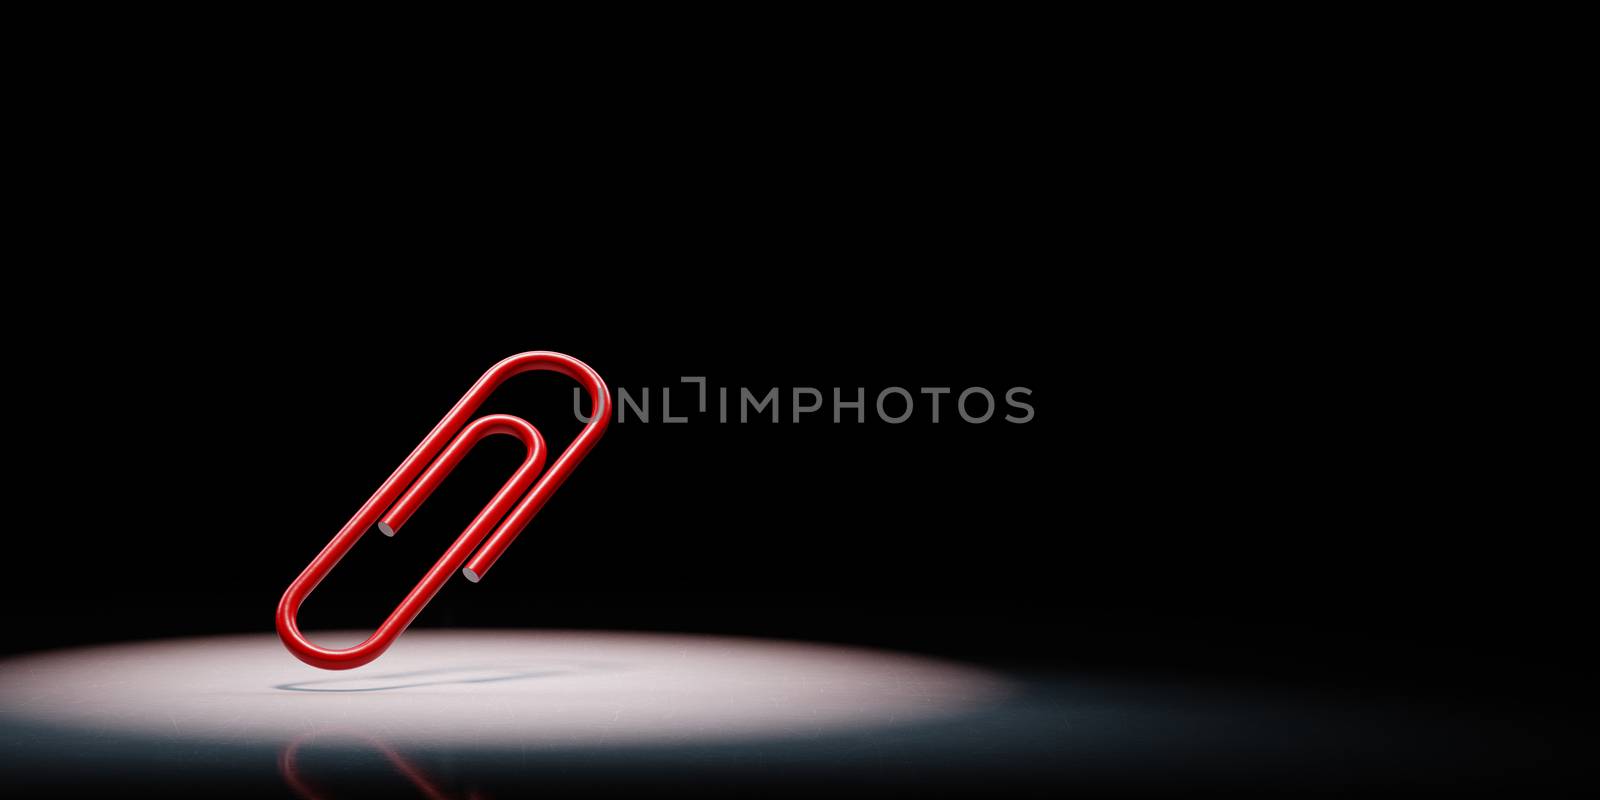 One Single Red Paperclip Spotlighted on Black Background with Copy Space 3D Illustration